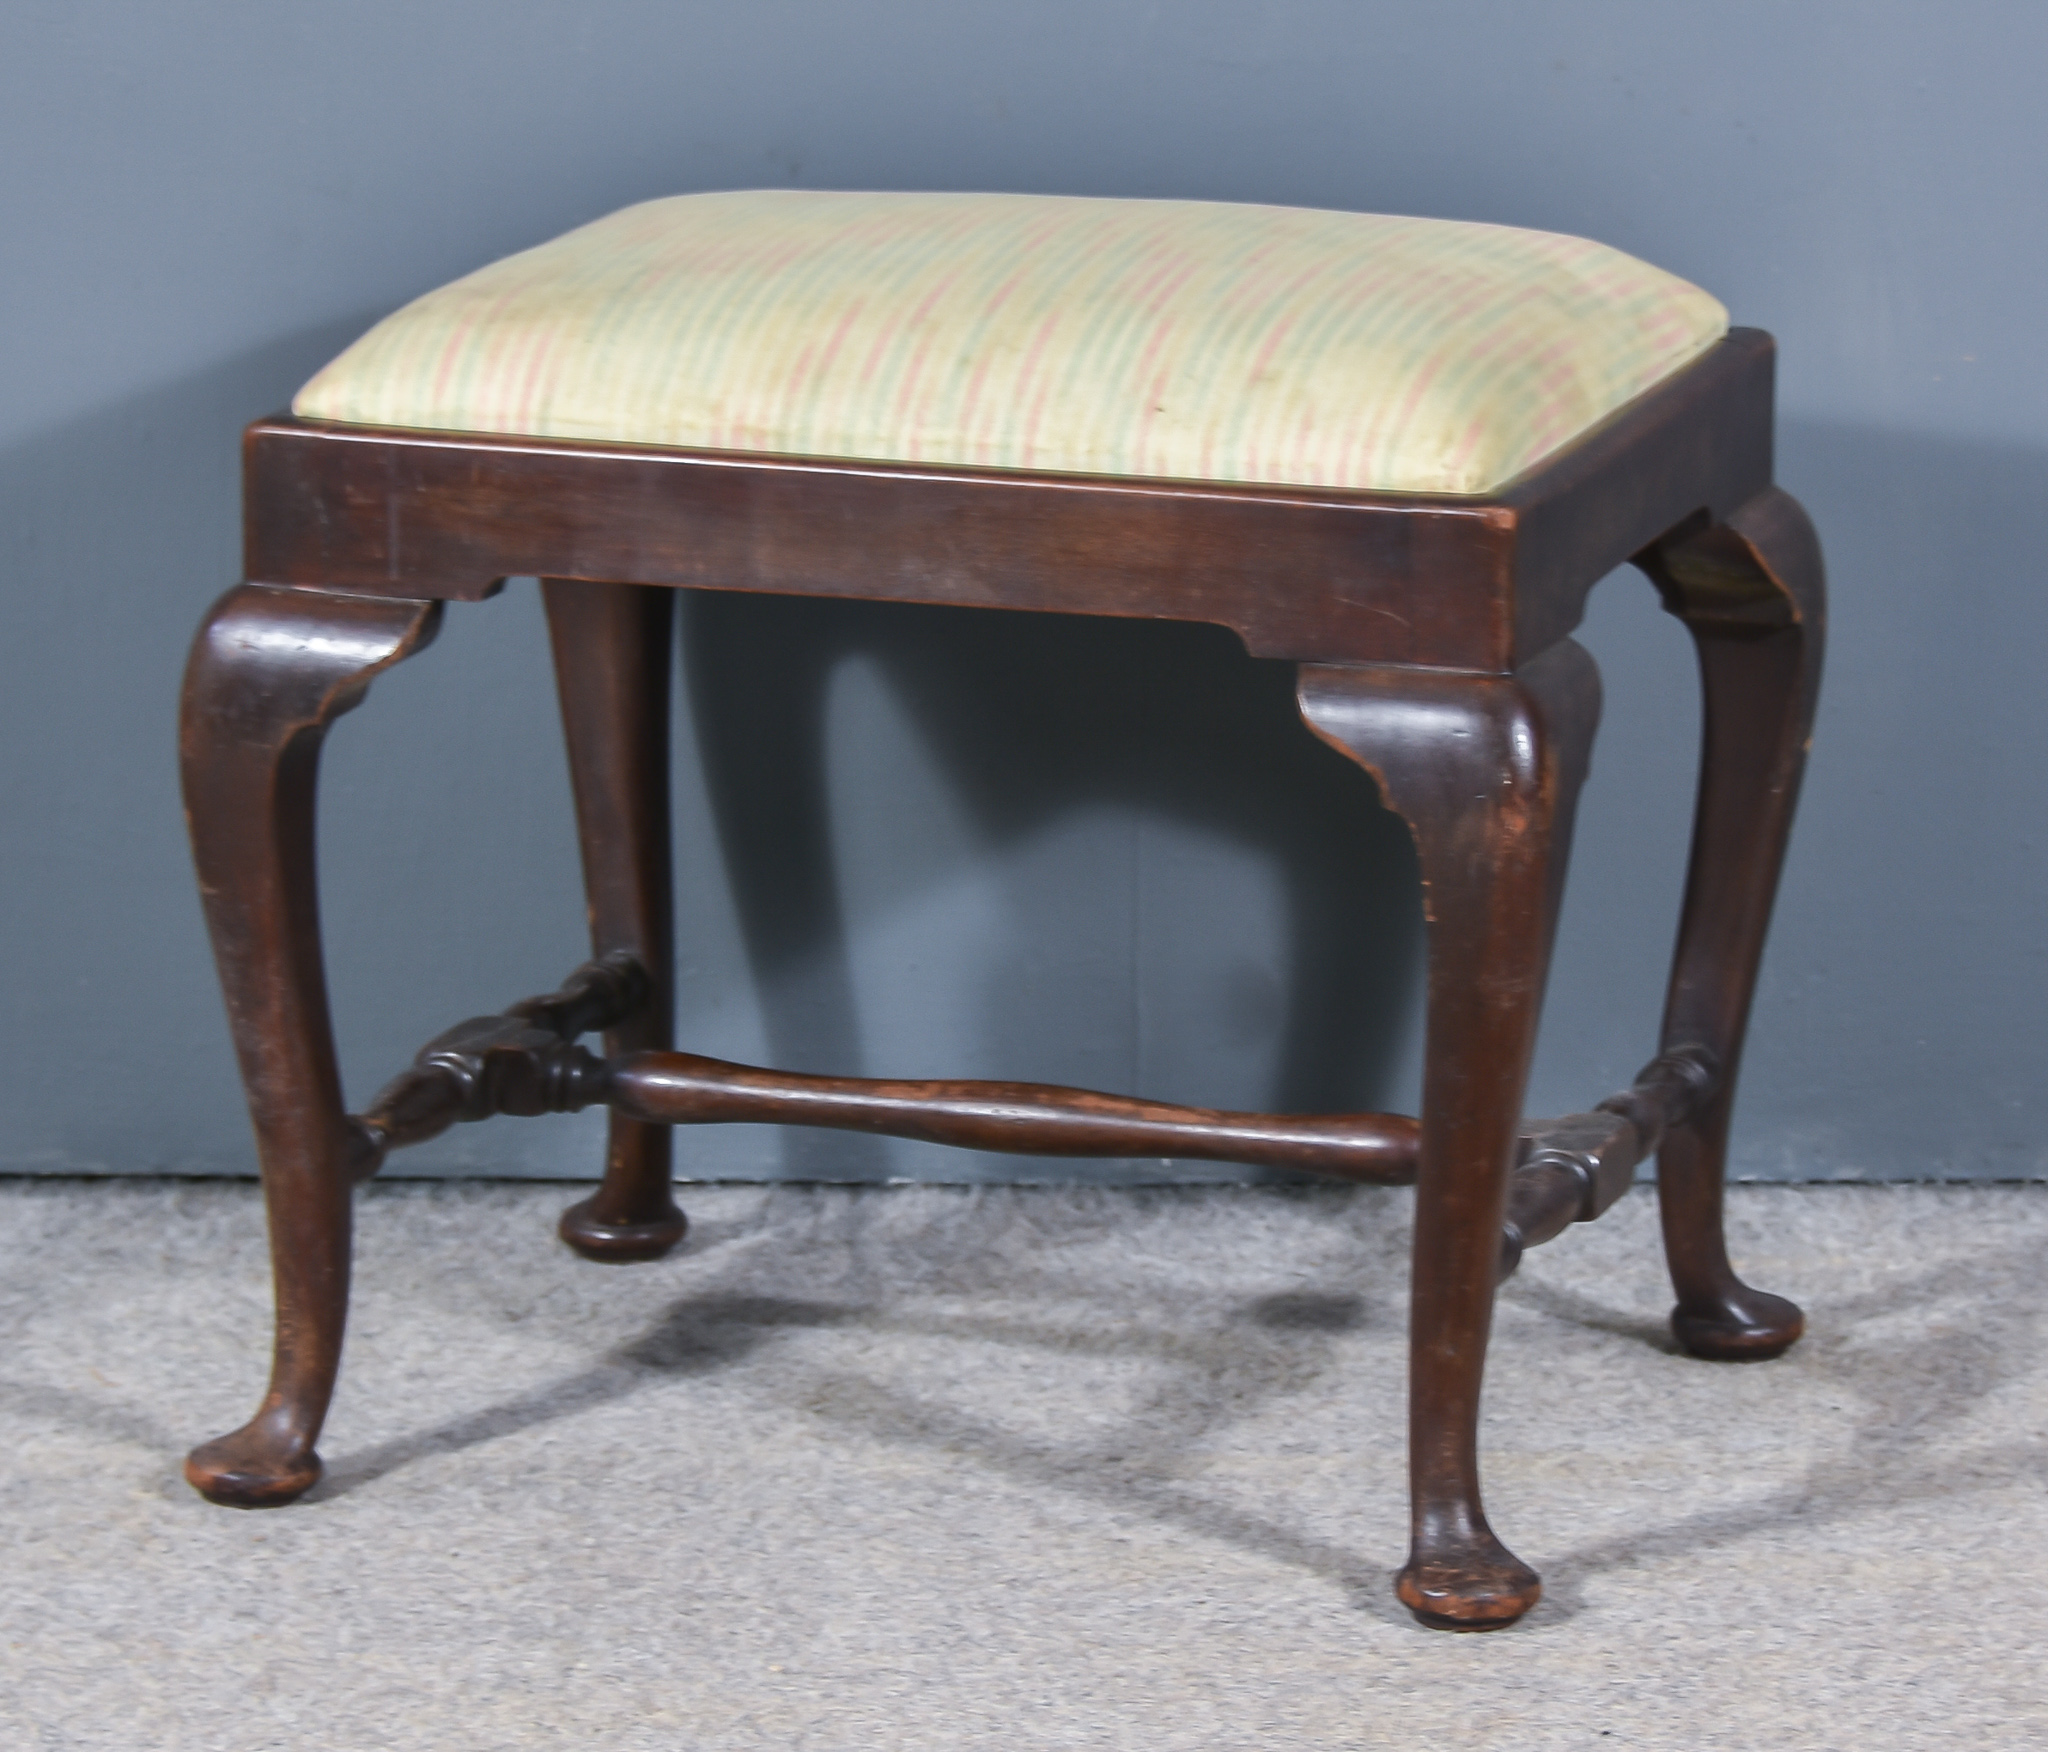 A Mahogany Framed Rectangular Dressing Table Stool, of Georgian Design, with upholstered drop-in